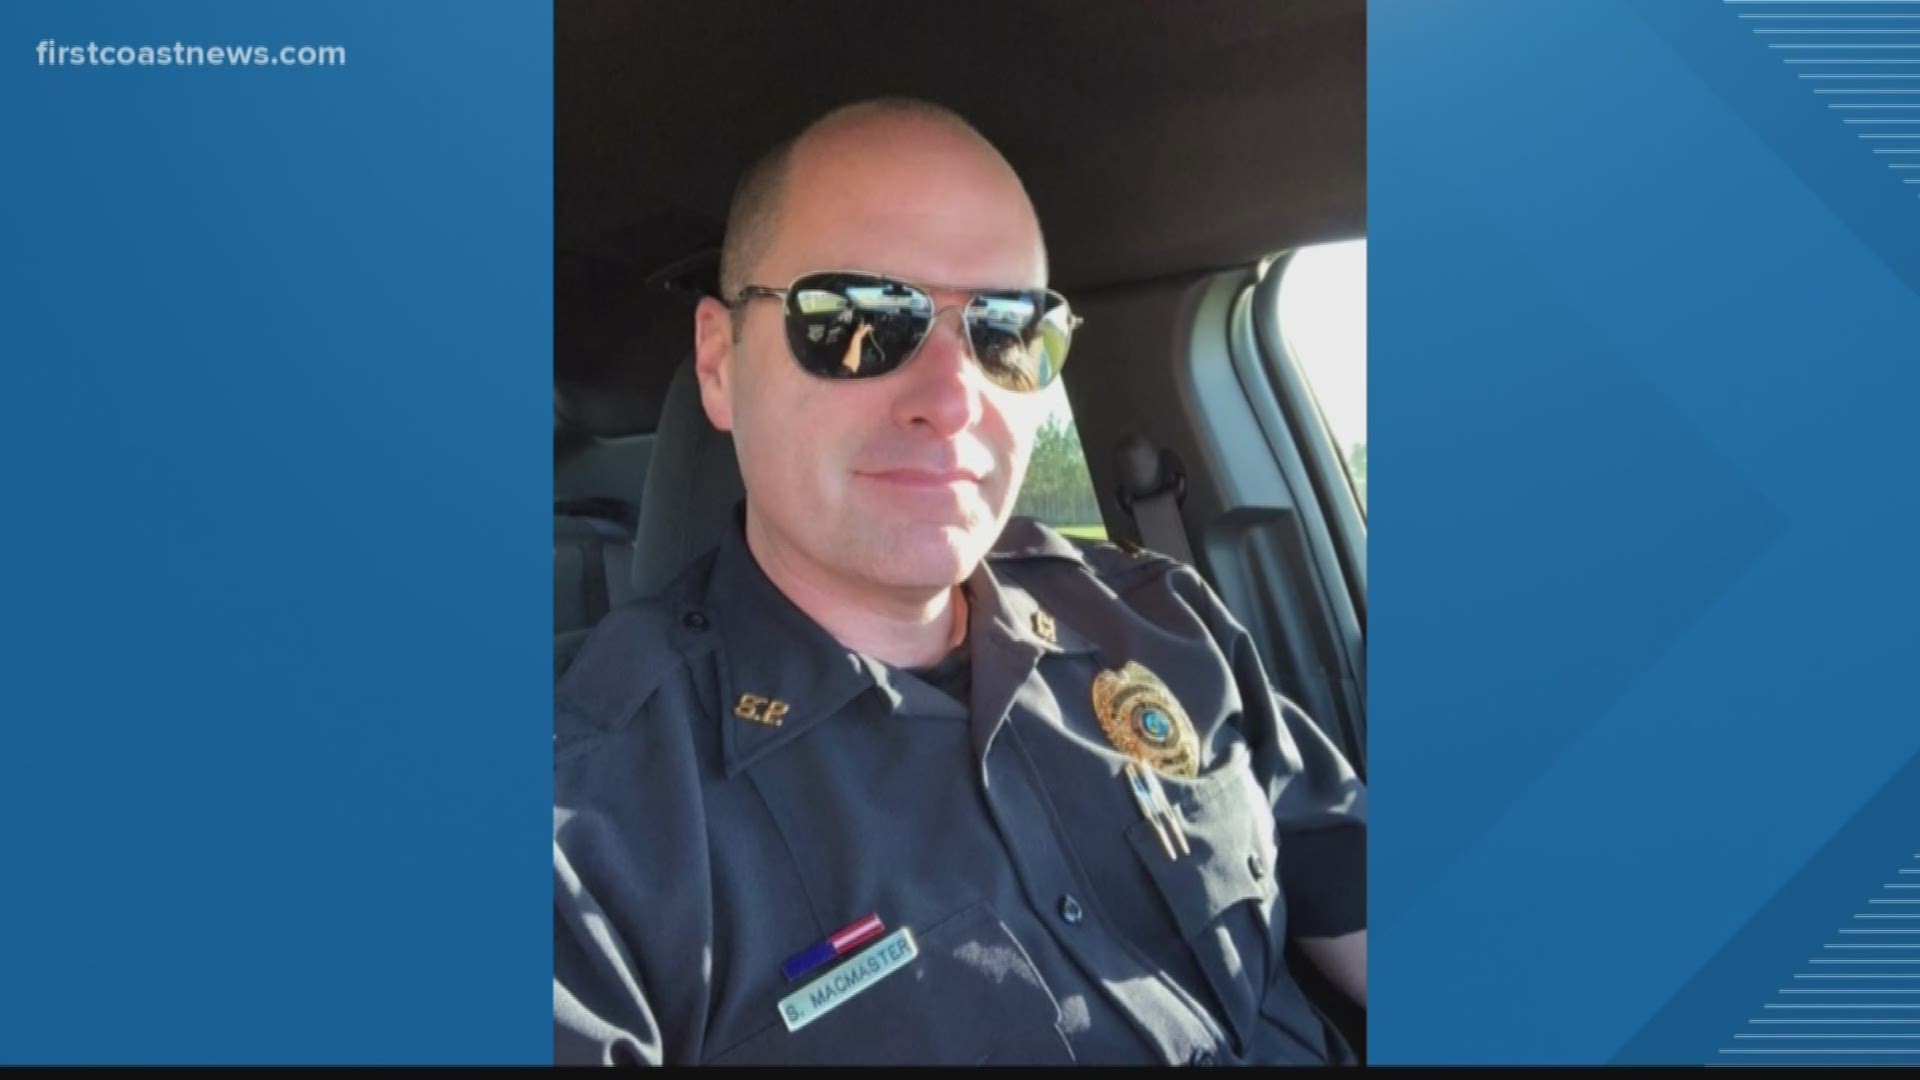 Sean MacMaster will begin his new assignment as a certified law enforcement professional on March 16, according to a spokesperson for Duval County Public Schools.